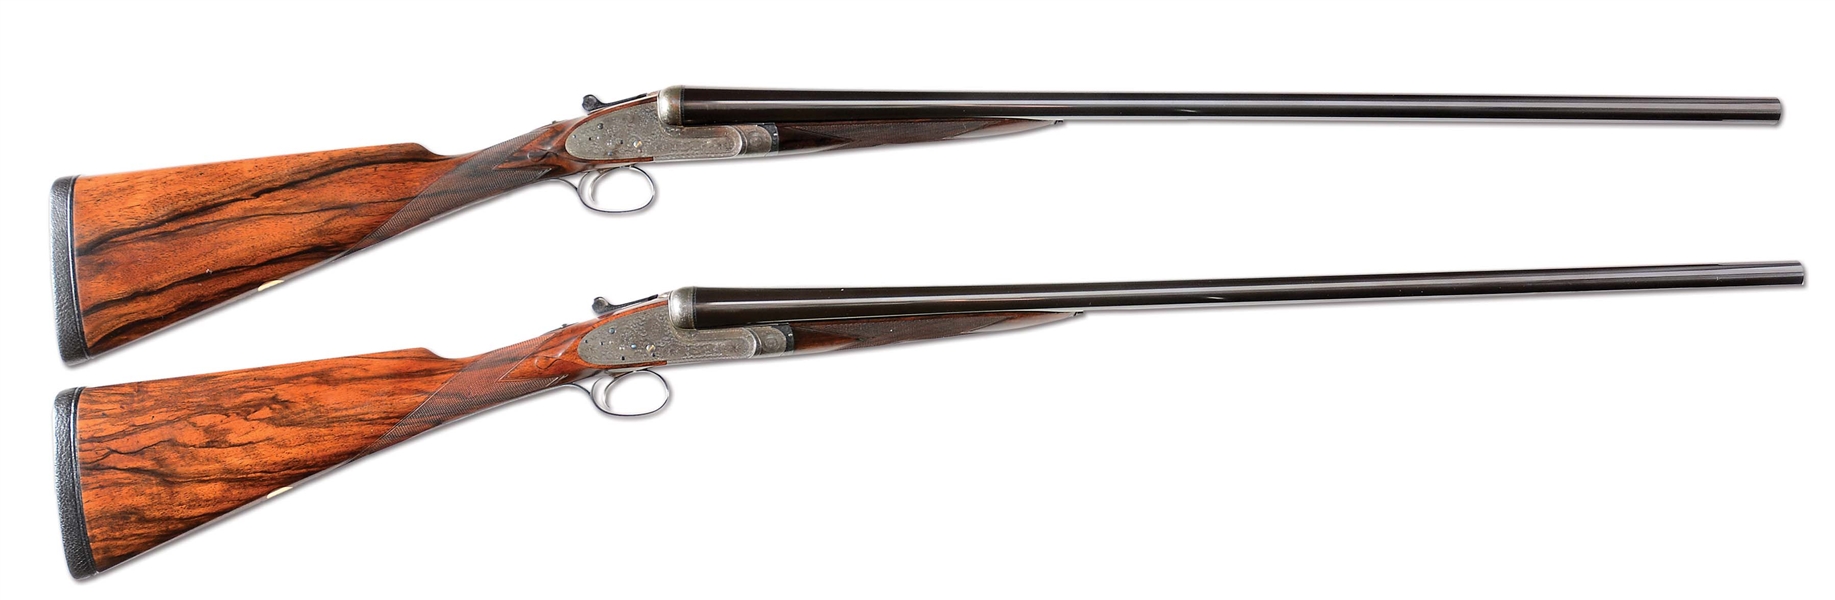 (C) FINE PAIR OF BOSS & CO. SIDELOCK EJECTOR SINGLE TRIGGER GAME SHOTGUNS WITH ORIGINAL CASE. 